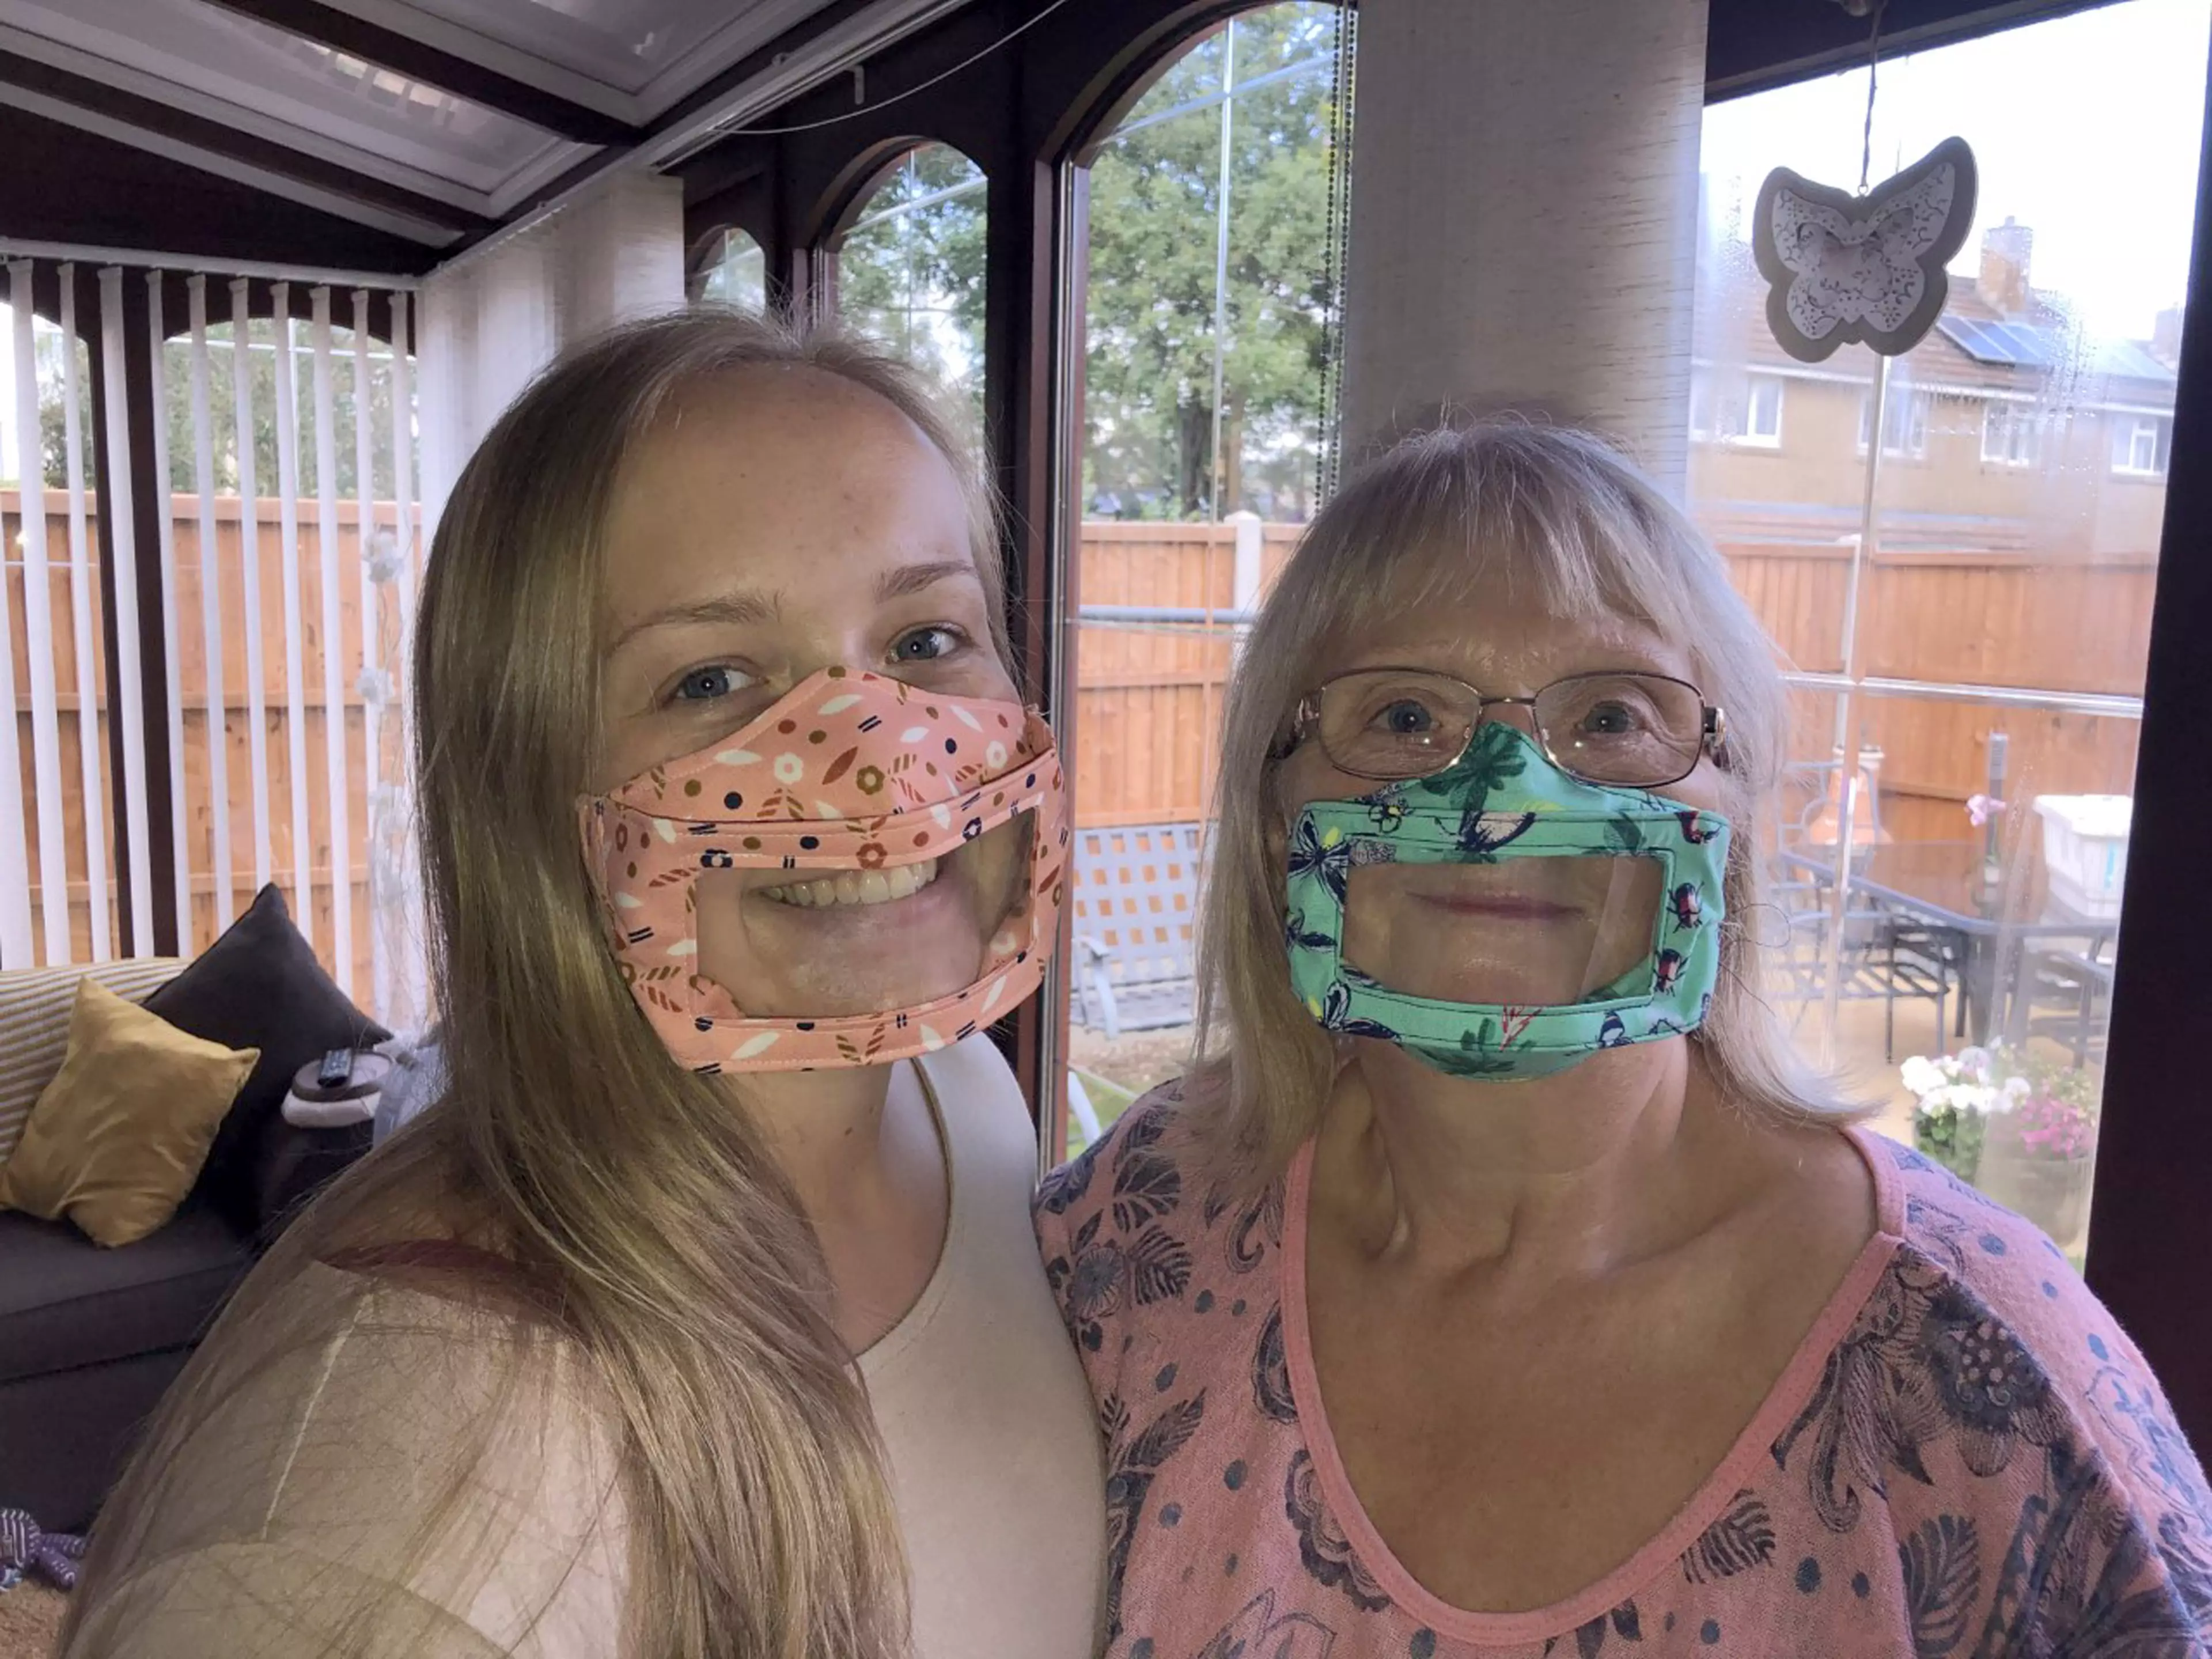 Julie, right, invented the clever face masks to help the hard of hearing (